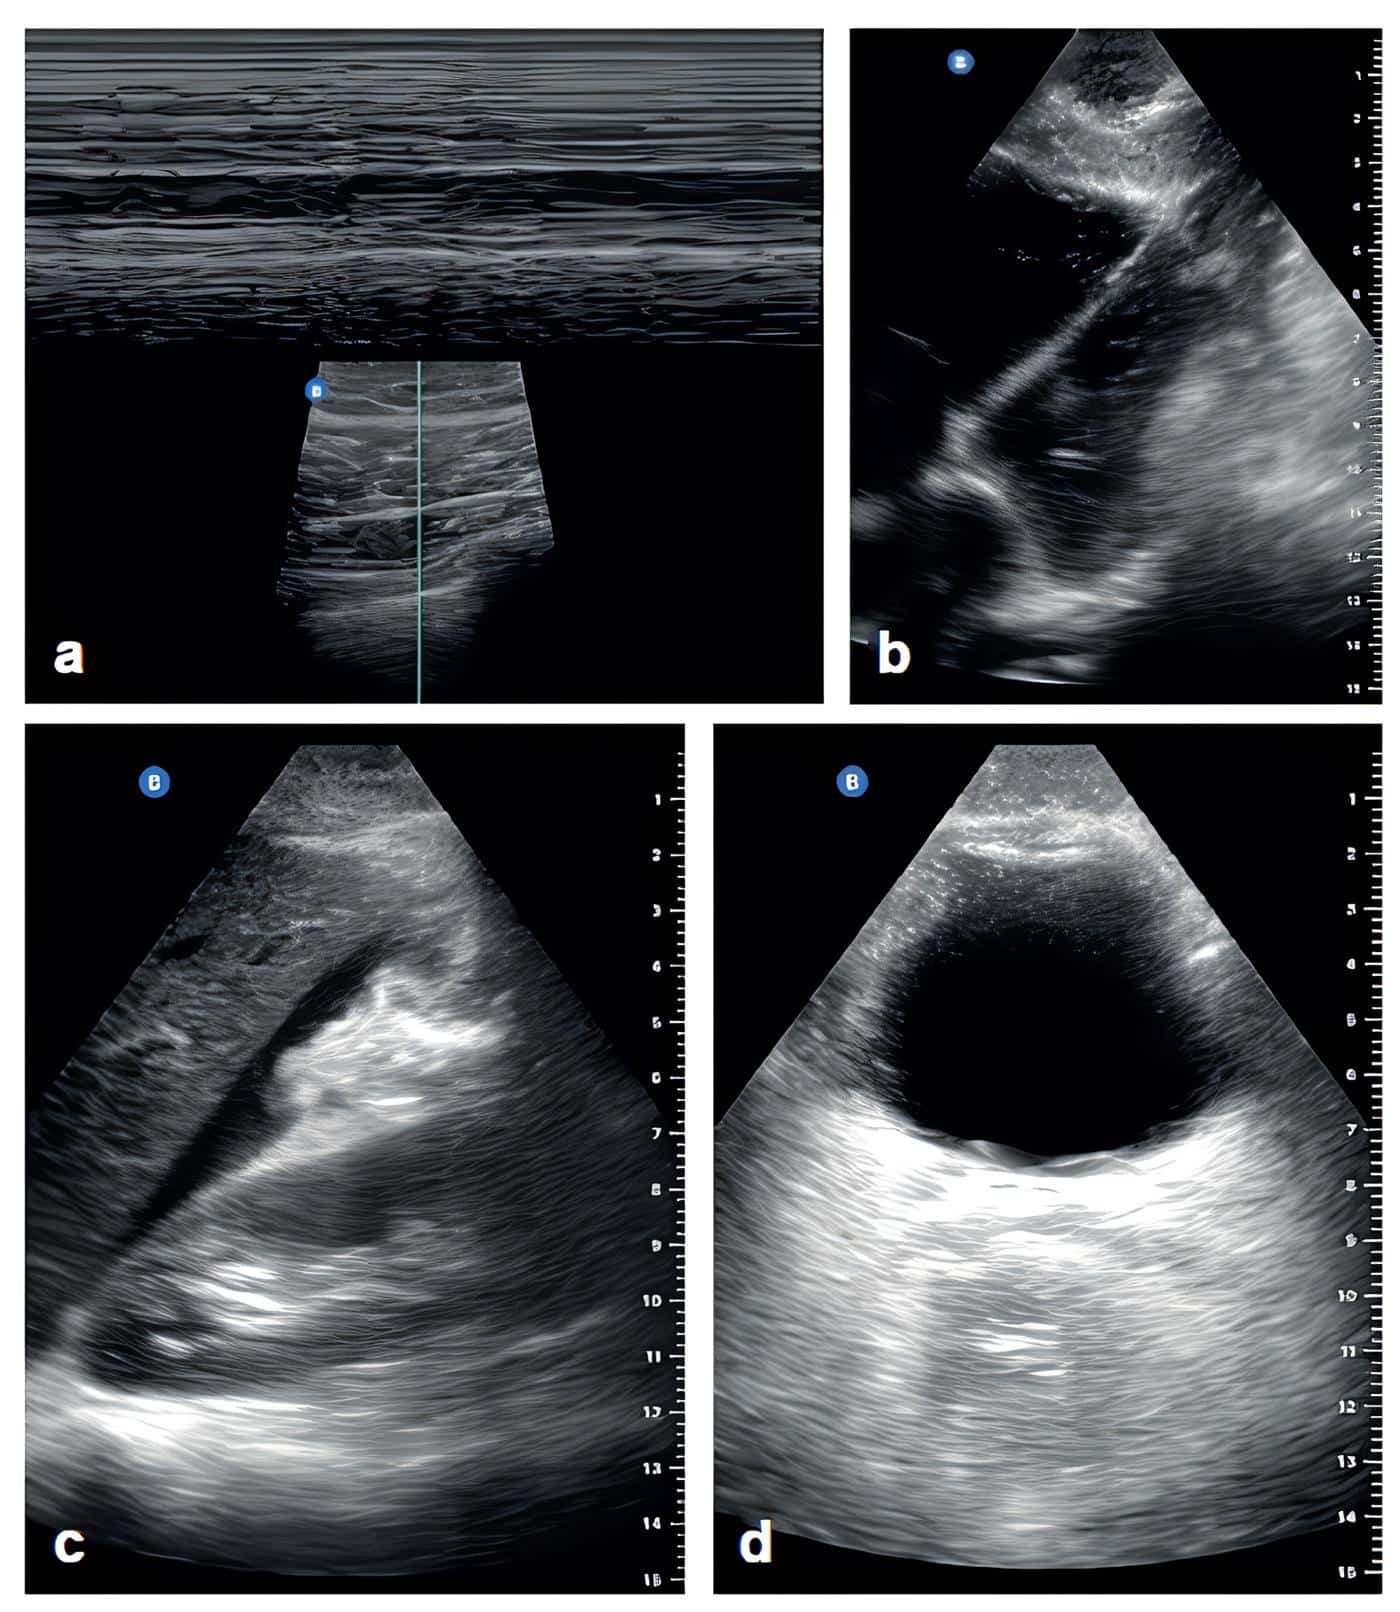 Findings with the use of E-FAST protocol using the portable ultrasound machine